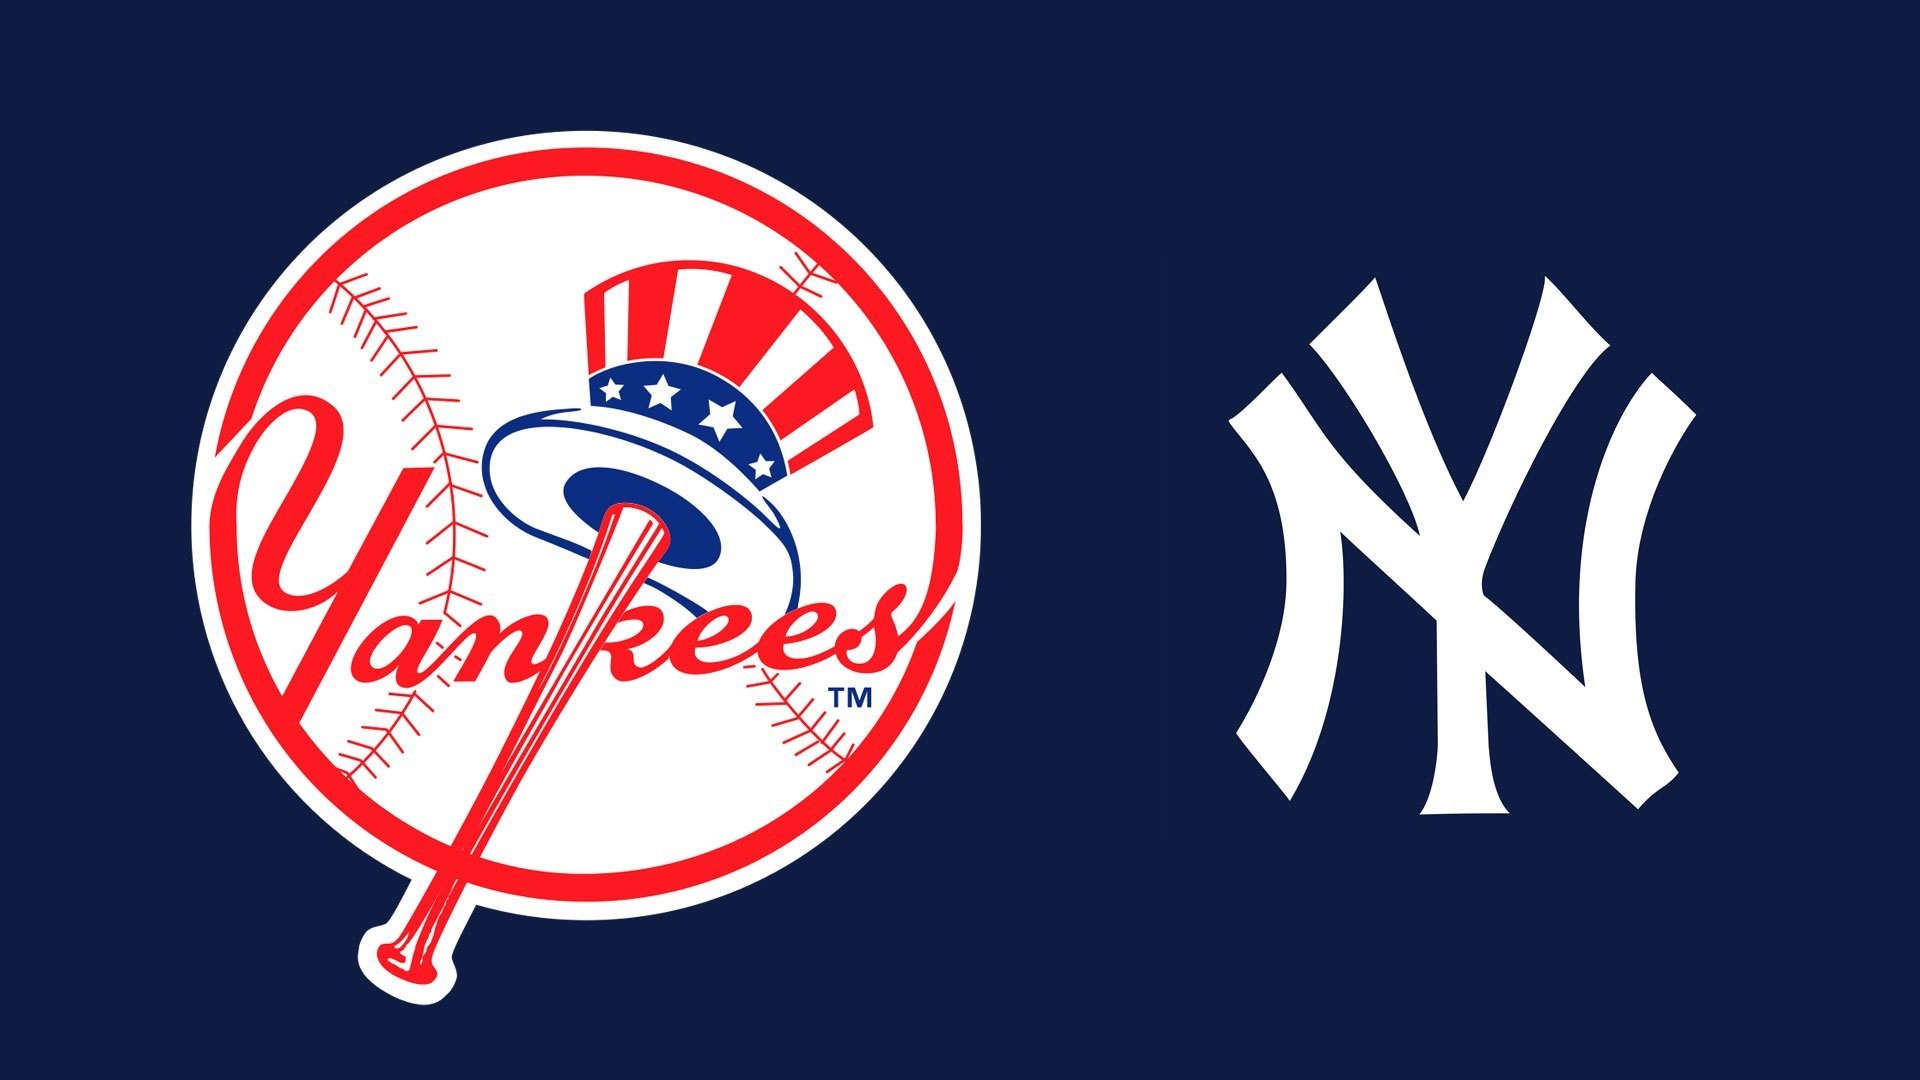 Wallpaper Desktop NY Yankees HD with high-resolution 1920x1080 pixel. You can use this wallpaper for Mac Desktop Wallpaper, Laptop Screensavers, Android Wallpapers, Tablet or iPhone Home Screen and another mobile phone device